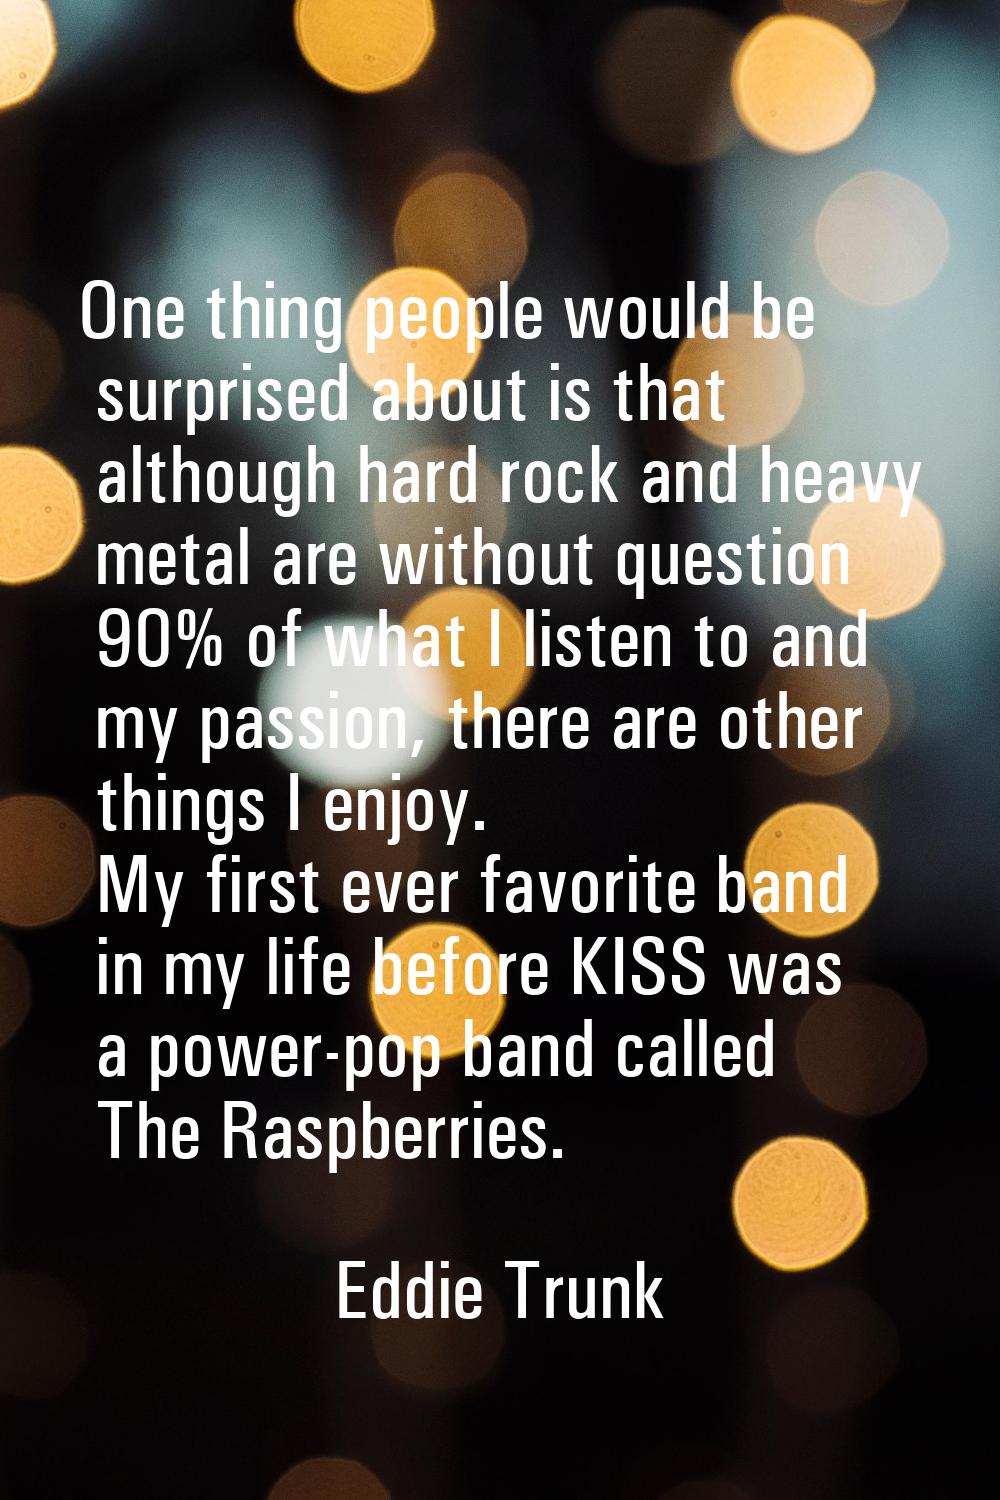 One thing people would be surprised about is that although hard rock and heavy metal are without qu